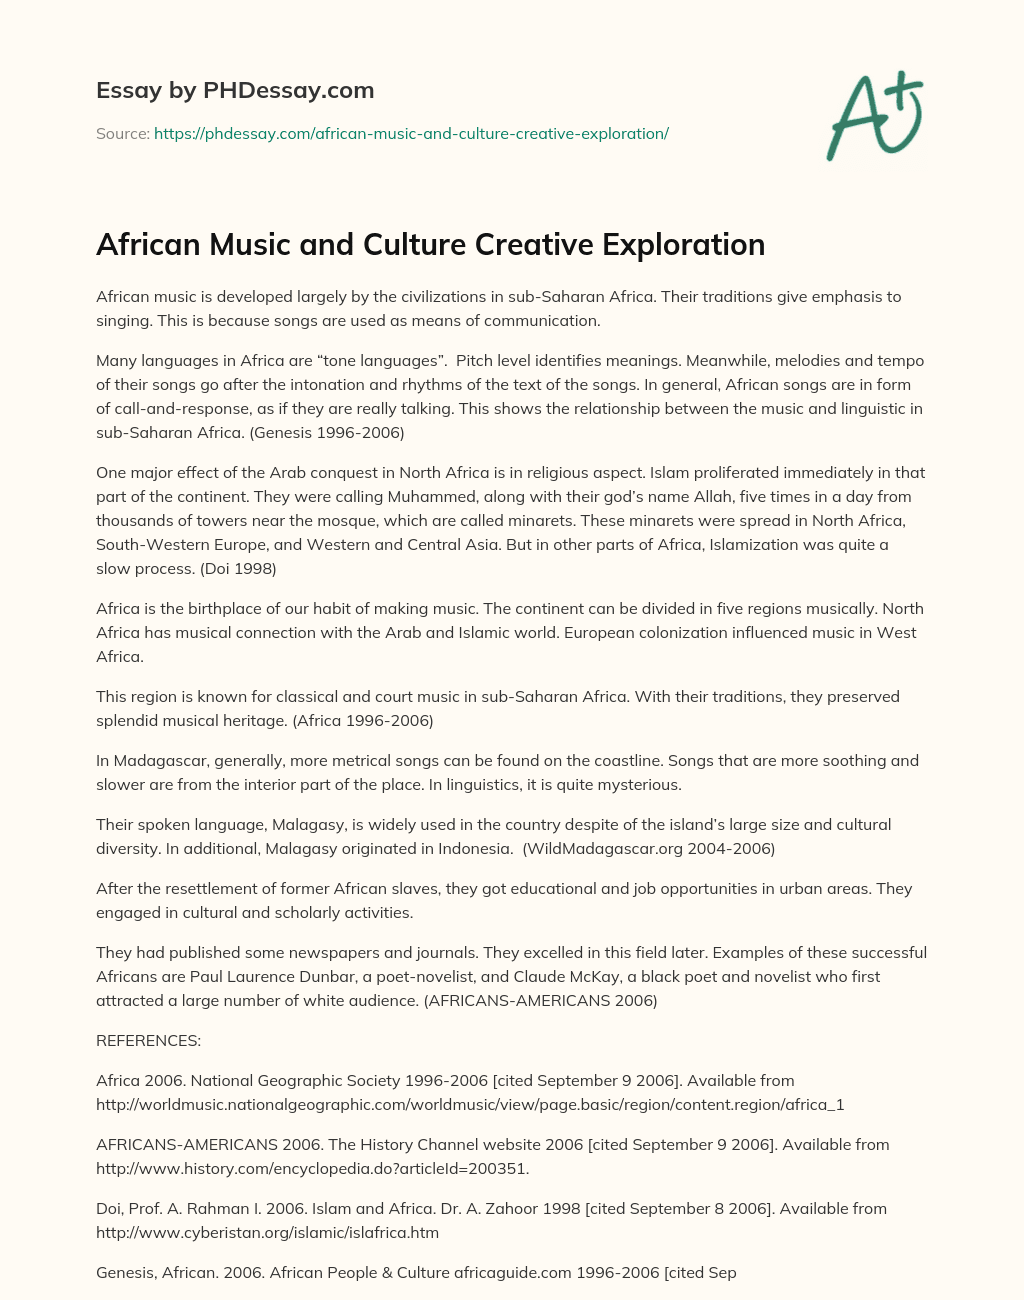 African Music and Culture Creative Exploration essay